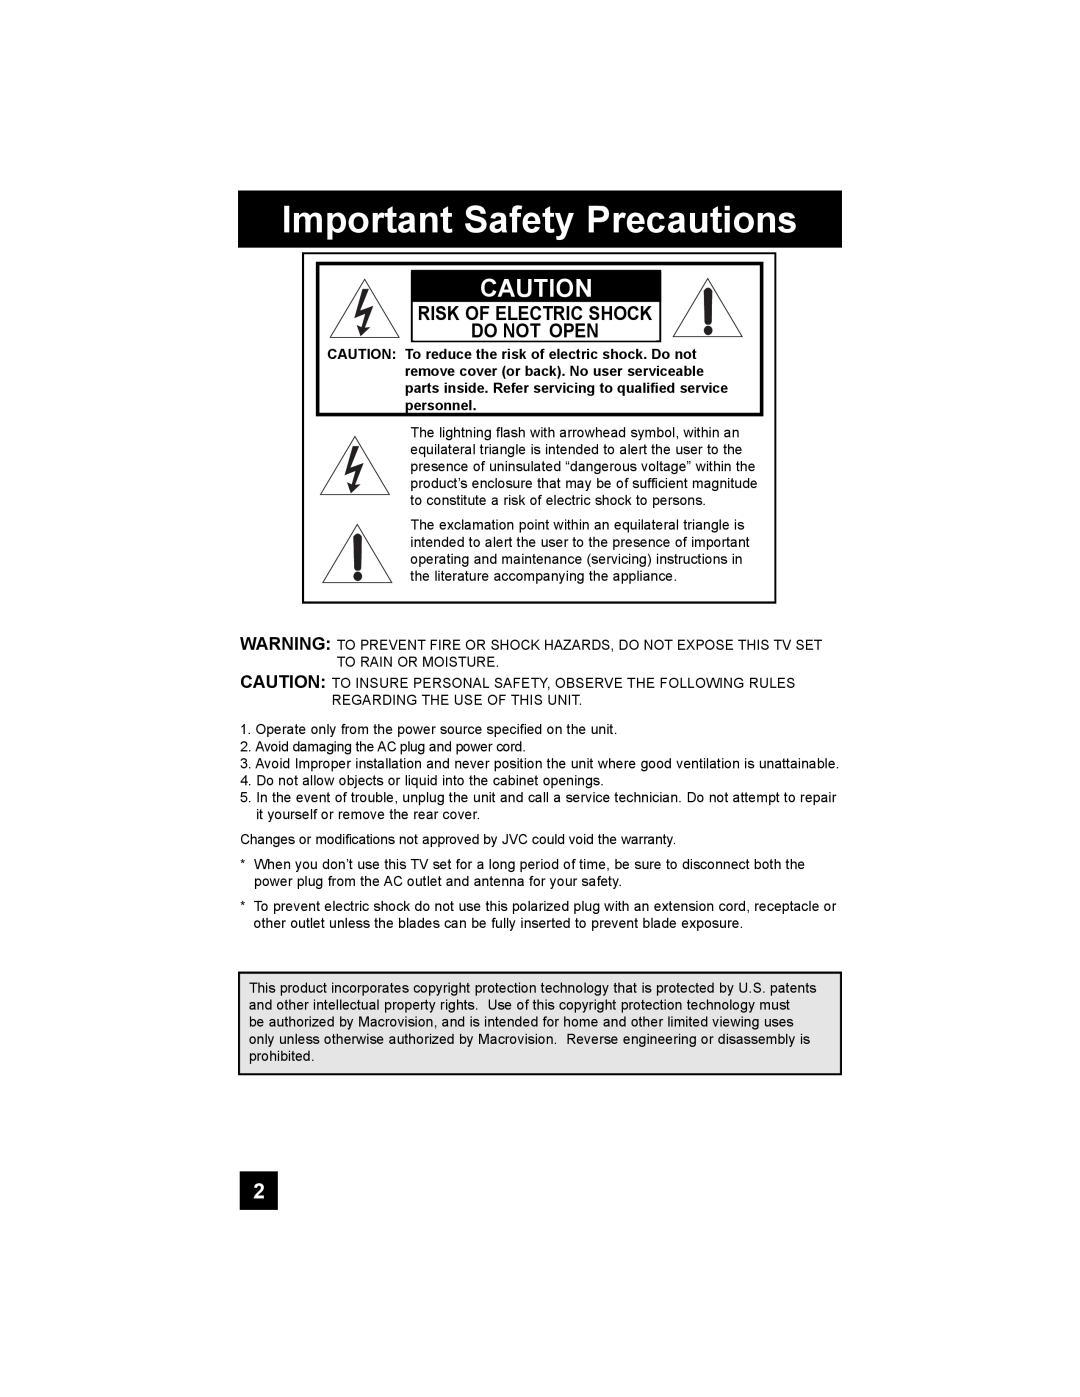 JVC PD-42X776 manual Important Safety Precautions, Risk Of Electric Shock Do Not Open 